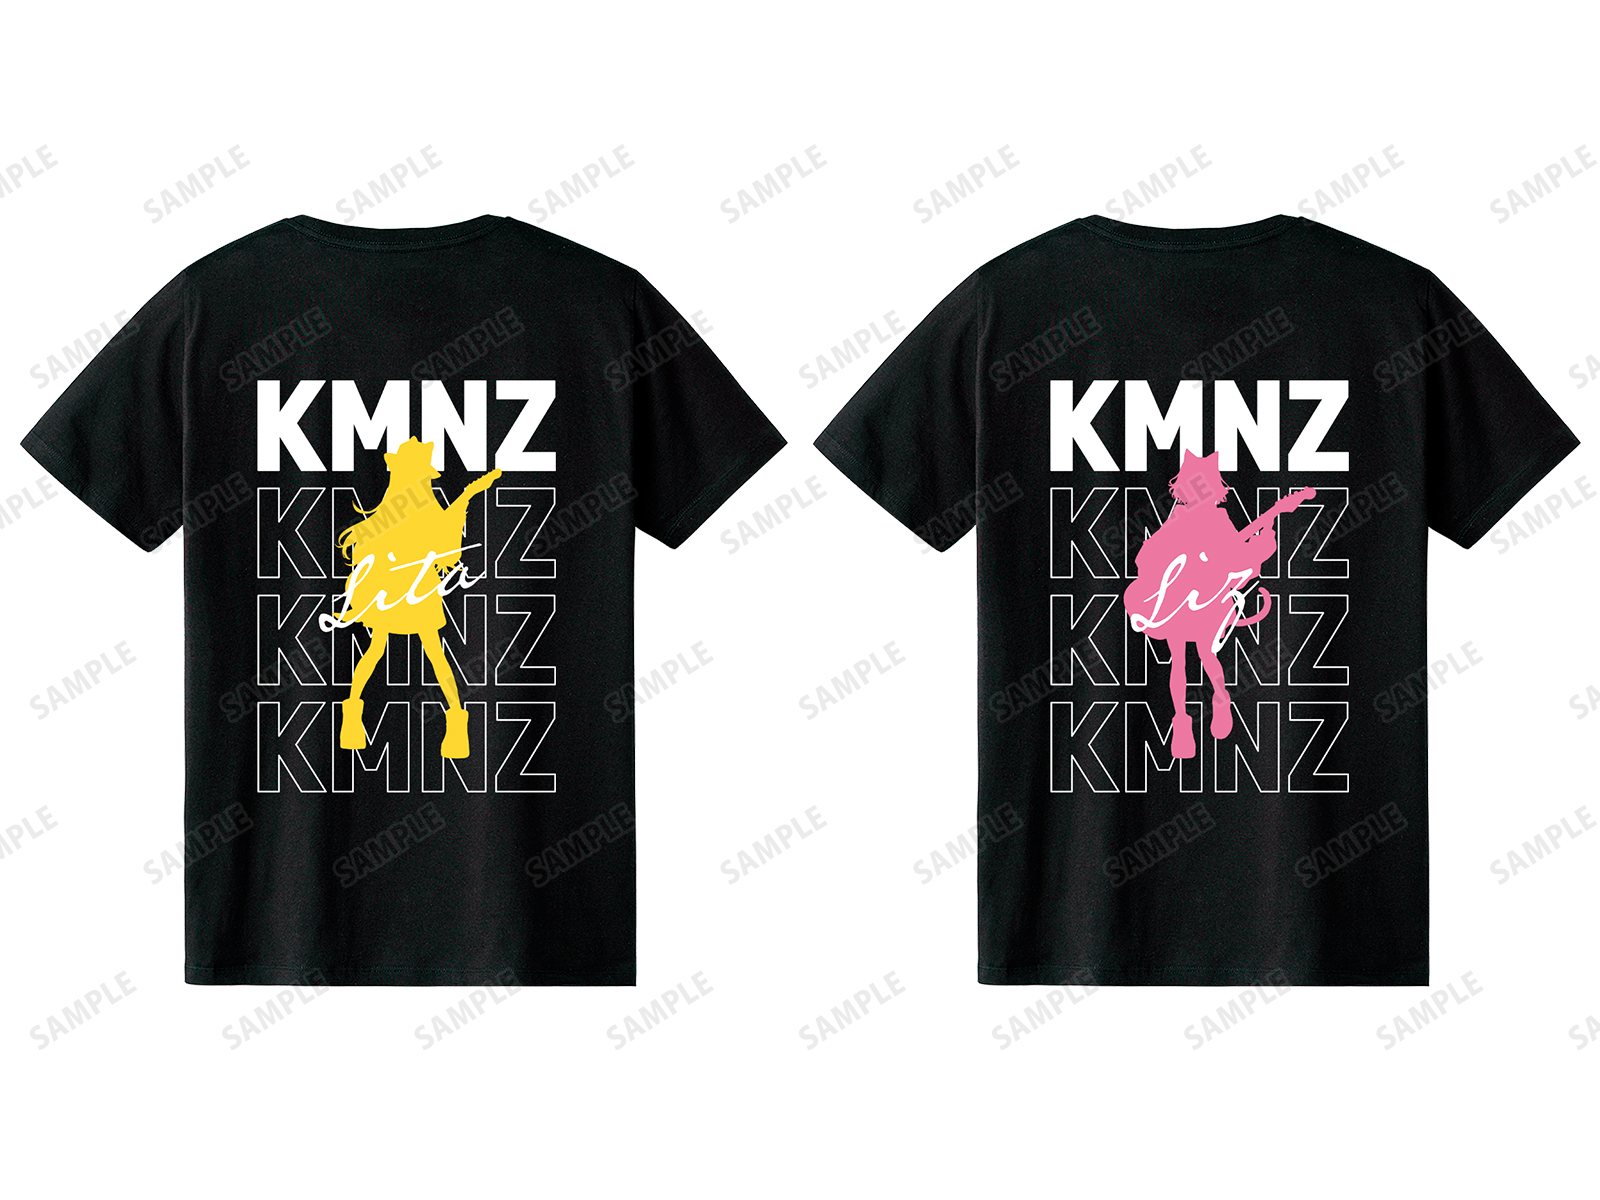 kmnz-pop-up-shop-in-tower-records10-2-2